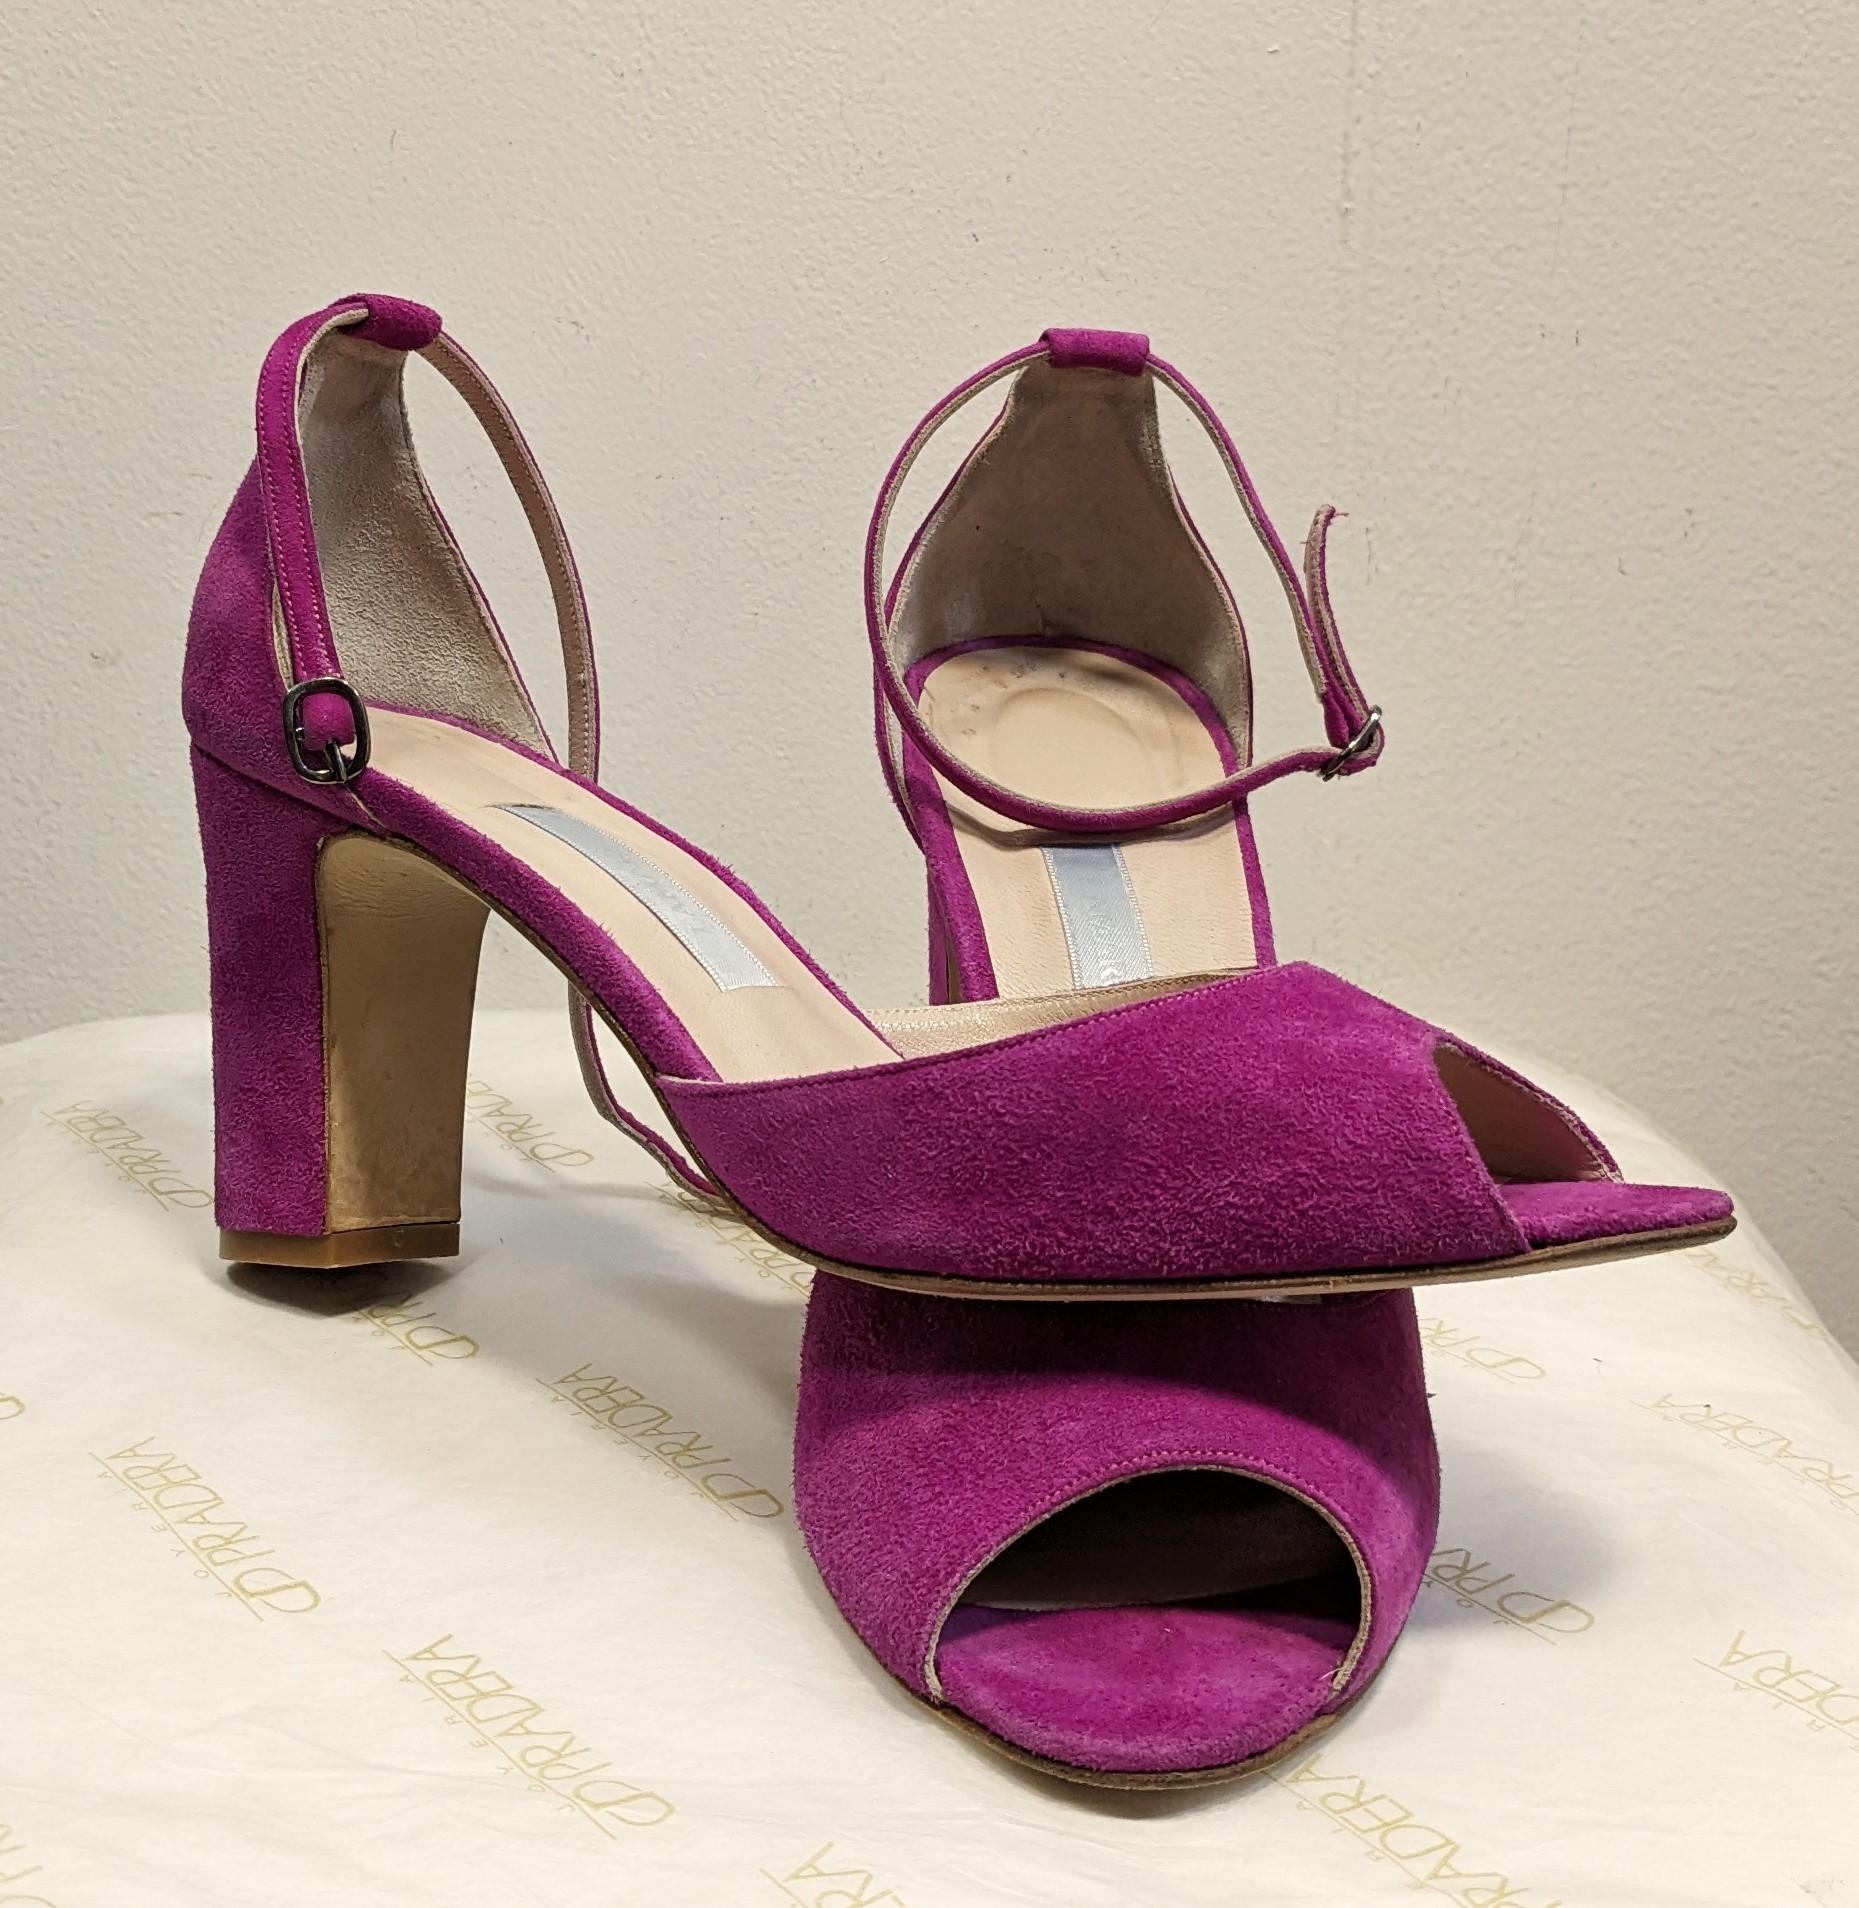 Pink velvet sandals from LAMARCA featuring an open toe, an anckle strap fastening with a side buckle fastening and a high square heel. 

Made In: Spain 
Color: Pink 
Material: Velvet
Marked Size: 38 Europe
Heel Height: 8,5 cm/ 3,35 inches



READY